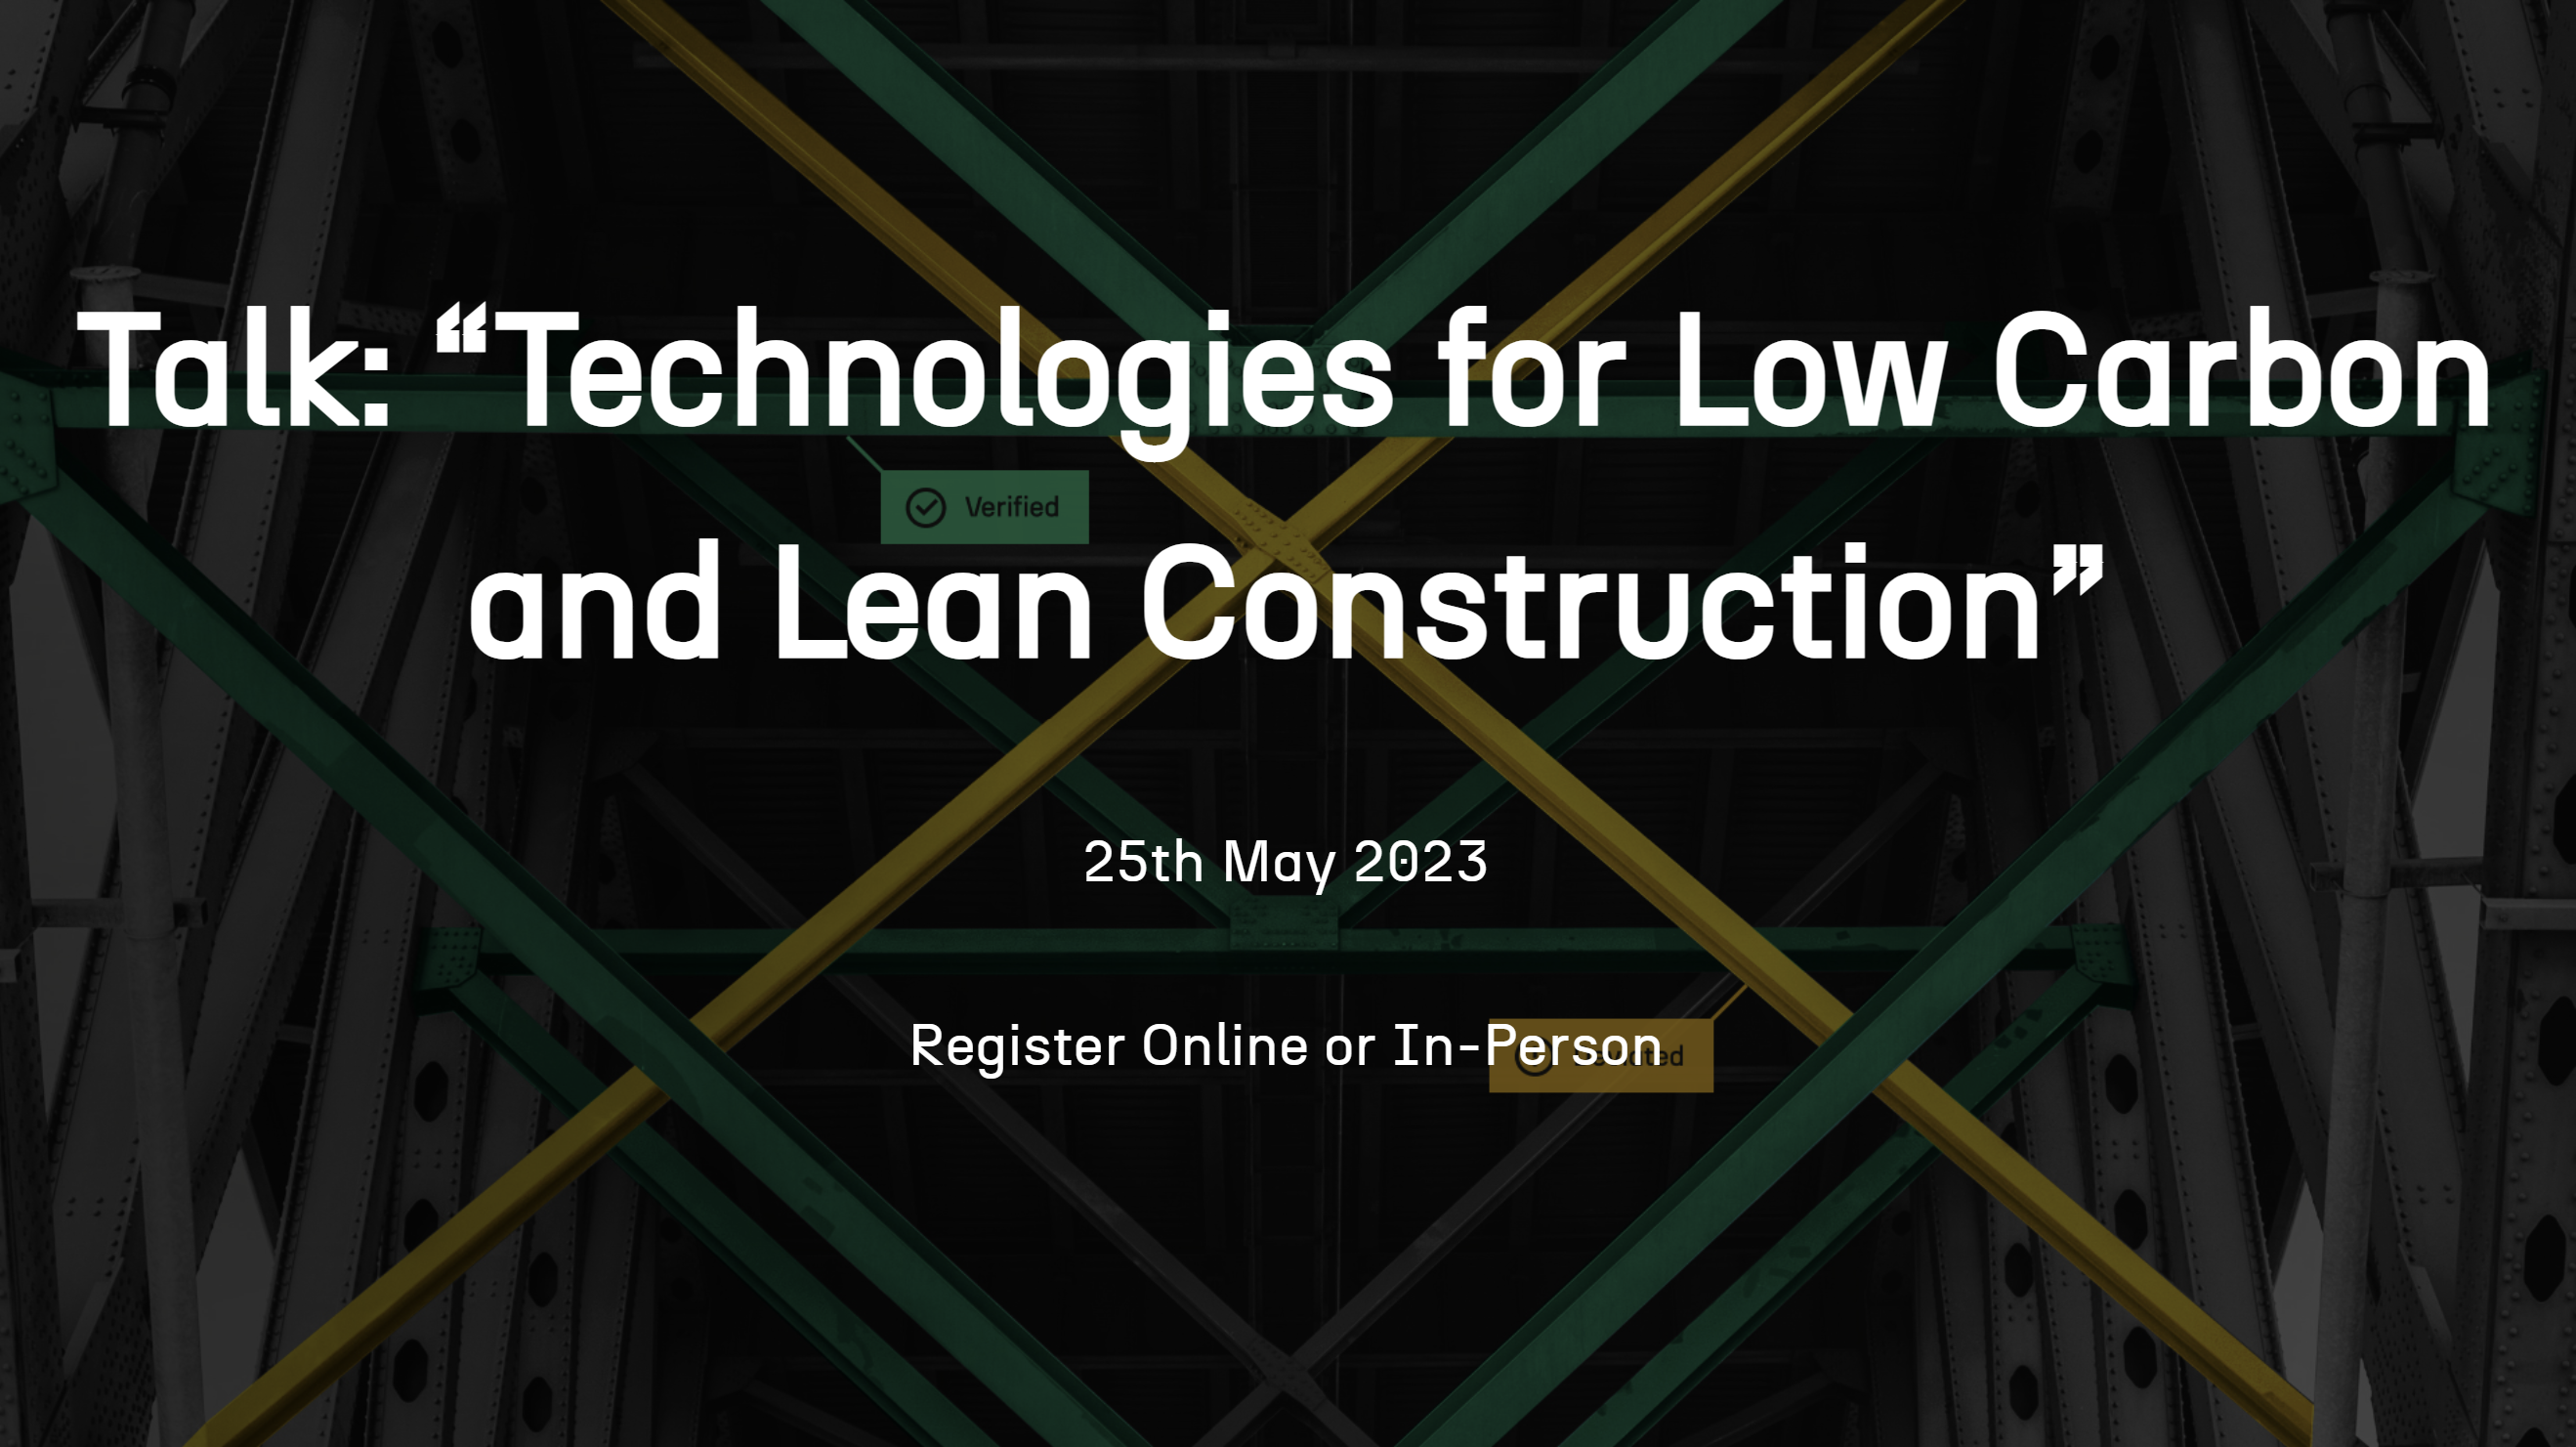 Talk: “Technologies for Low Carbon and Lean Construction”